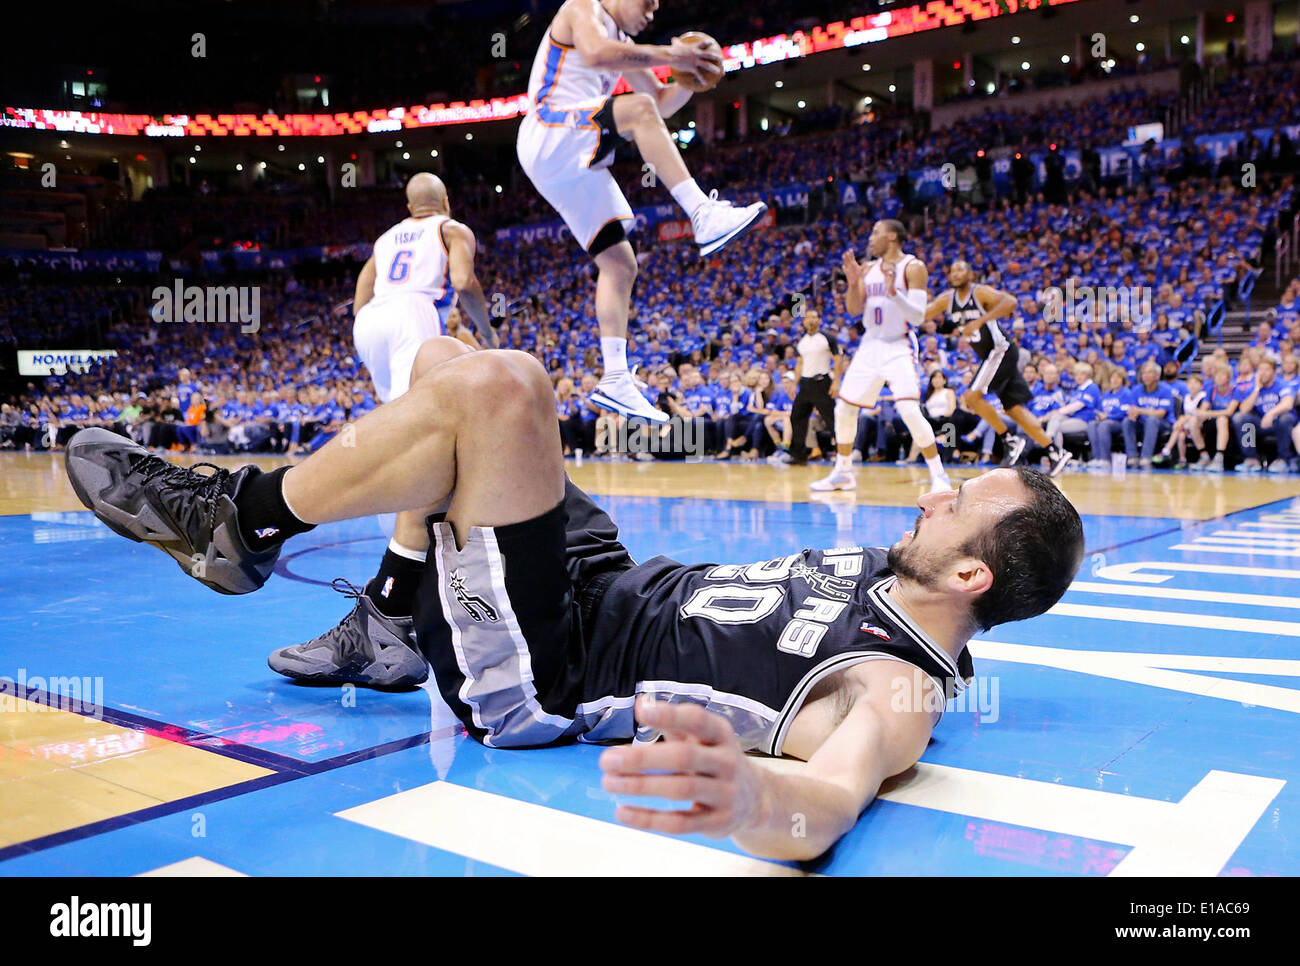 May 25, 2014 - Oklahoma City, OKLAHOMA, USA - San Antonio Spurs' Manu Ginobili lies on the floor after a play during second half action in Game 3 of the Western Conference Finals against the Oklahoma City Thunder Sunday May 25, 2014 at Chesapeake Energy Arena in Oklahoma City, OK. The Thunder won 106-97. (Credit Image: © San Antonio Express-News/ZUMAPRESS.com) Stock Photo